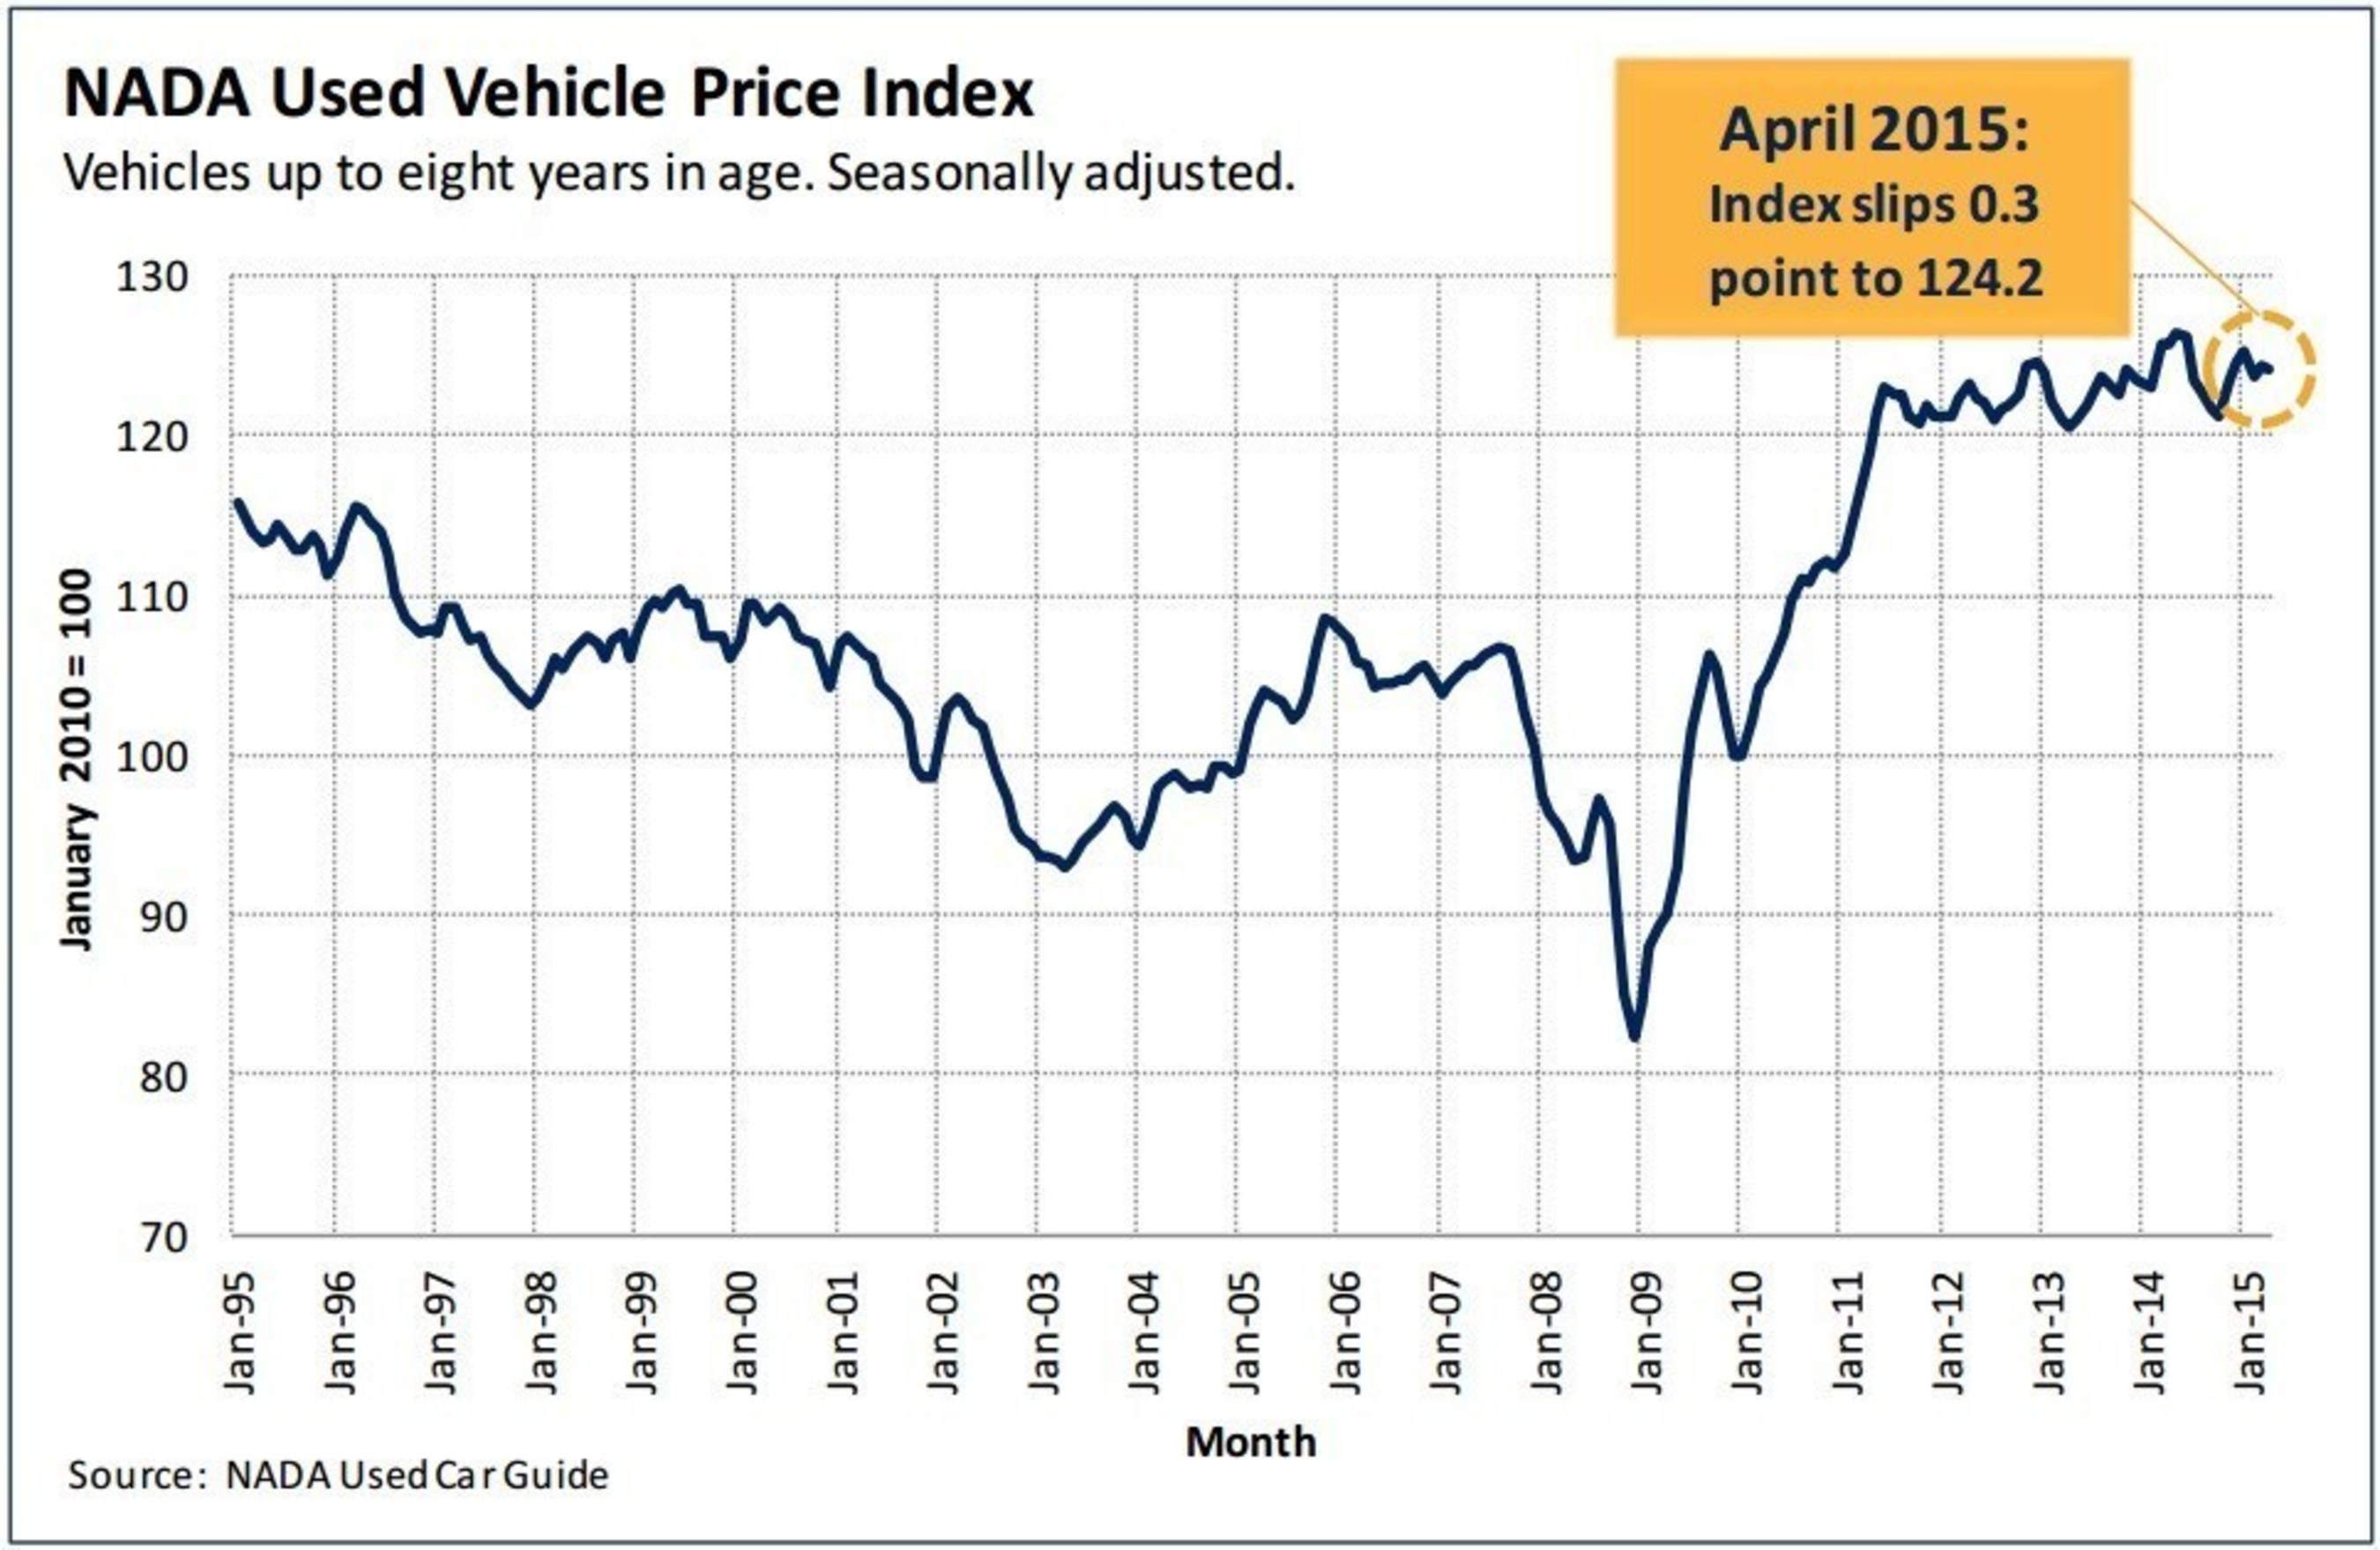 While New Vehicle Sales Increase, Used Vehicle Values Steady